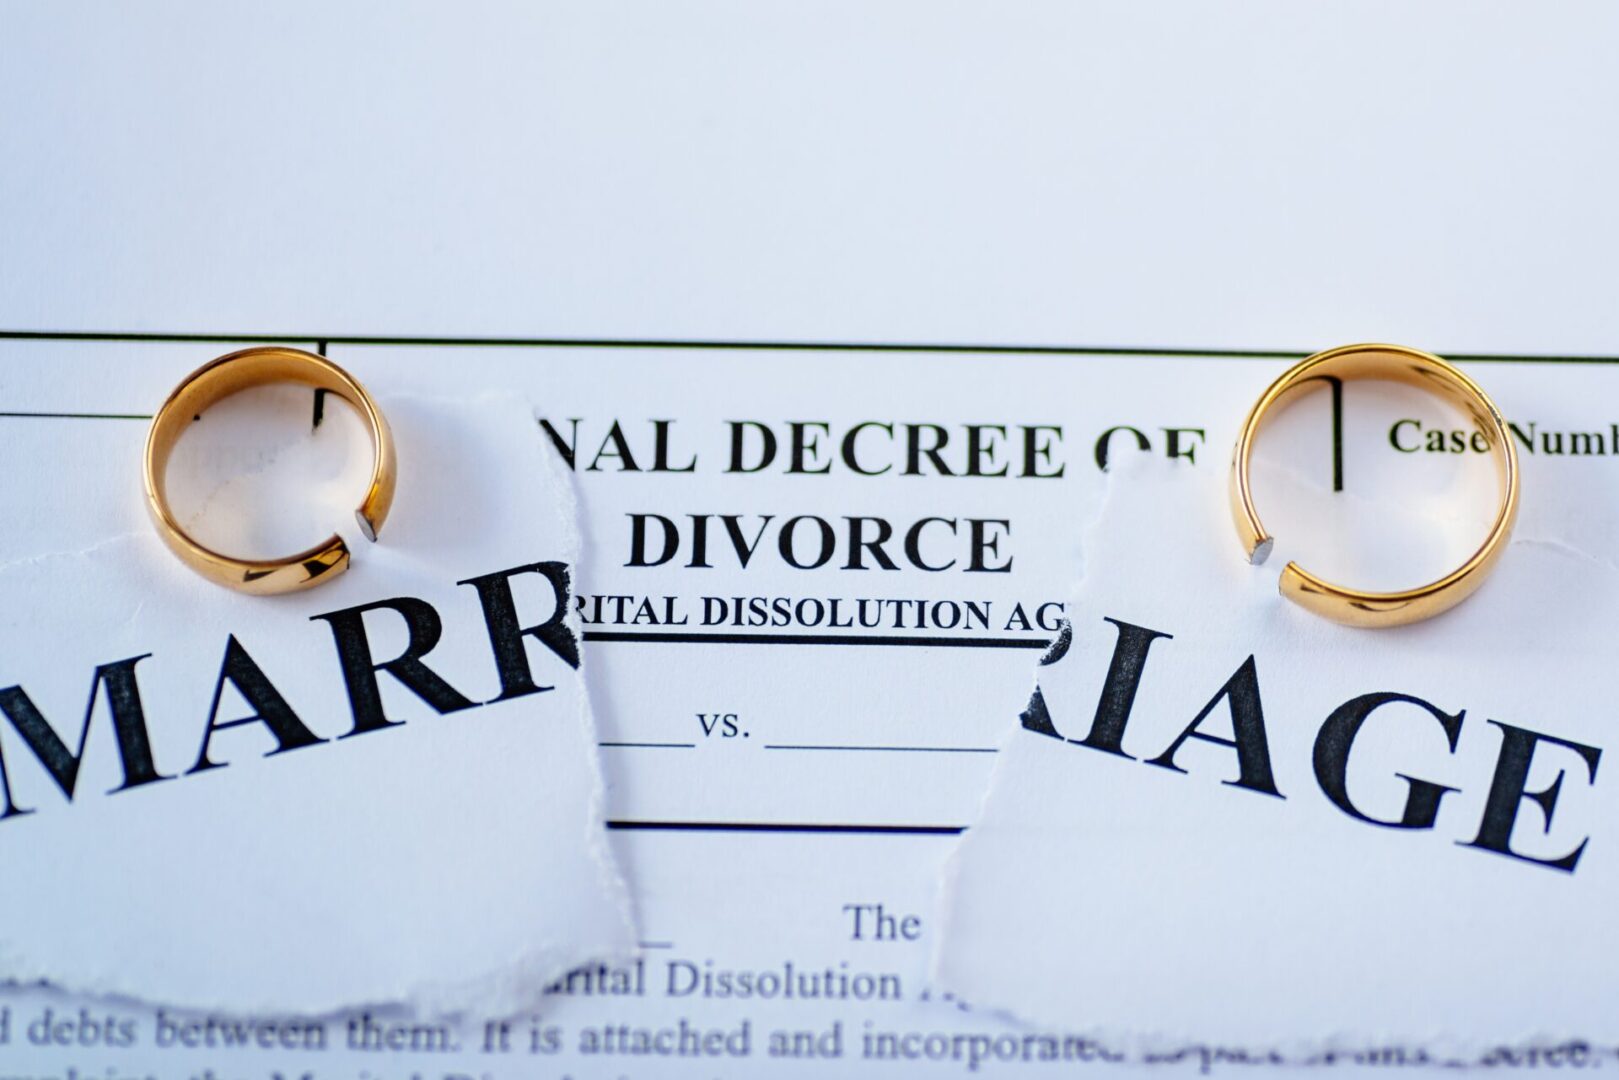 Divorce decree and two broken wedding rings. Divorce and separation concept